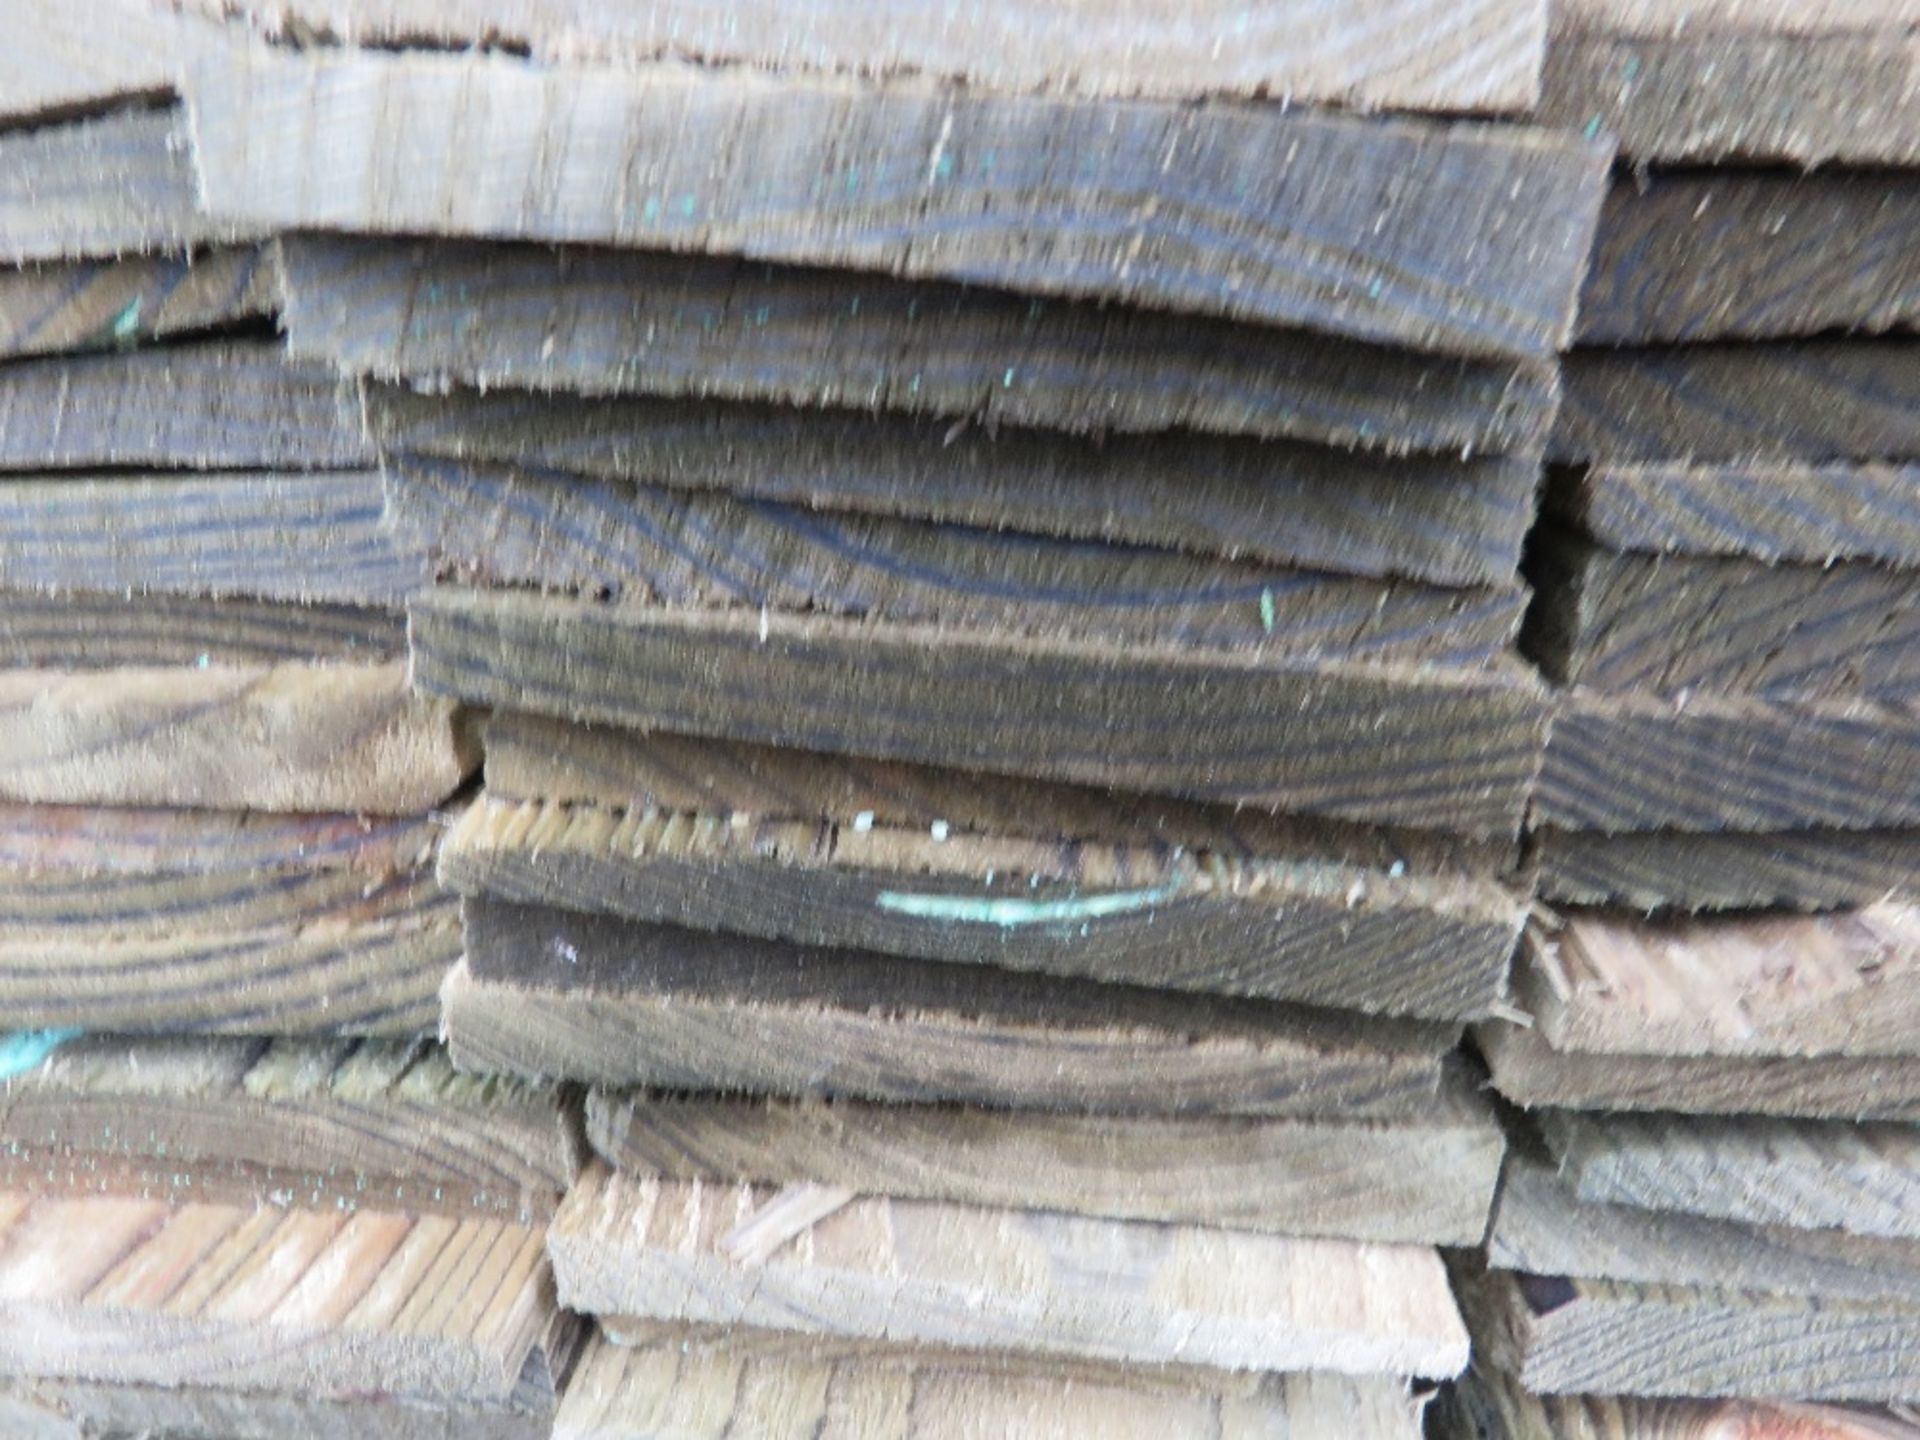 PACK OF PRESSURE TREATED FEATHER EDGE TYPE TIMBER CLADDING BOARDS: 1.50M LENGTH X 100MM WIDTH APPROX - Image 3 of 3